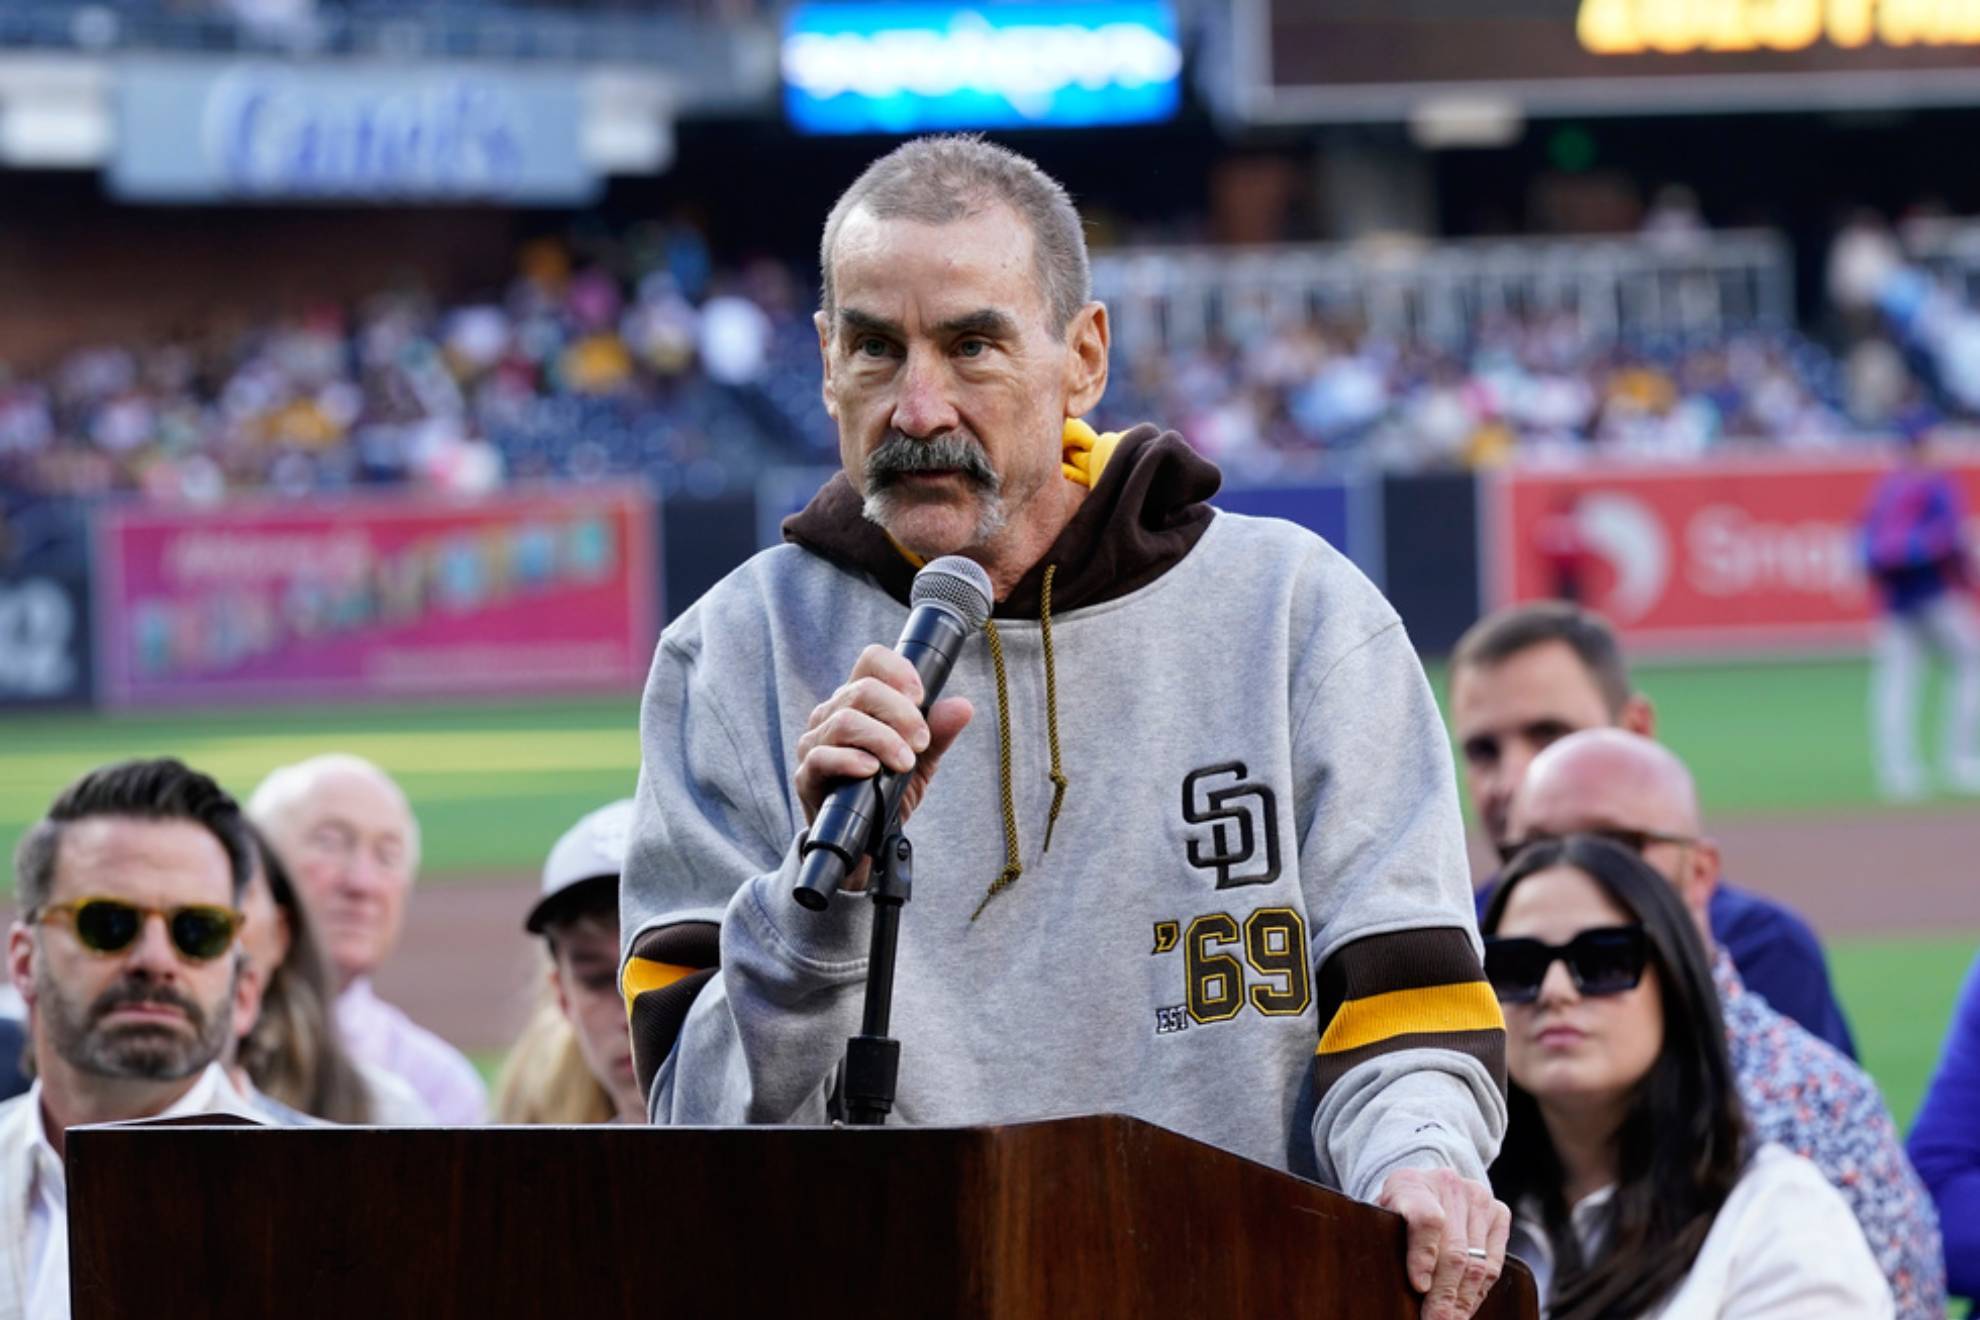 San Diego Padres owner Peter Seidler speaks during induction ceremonies for the Padres Hall of Fame before a baseball game against the Texas Rangers /